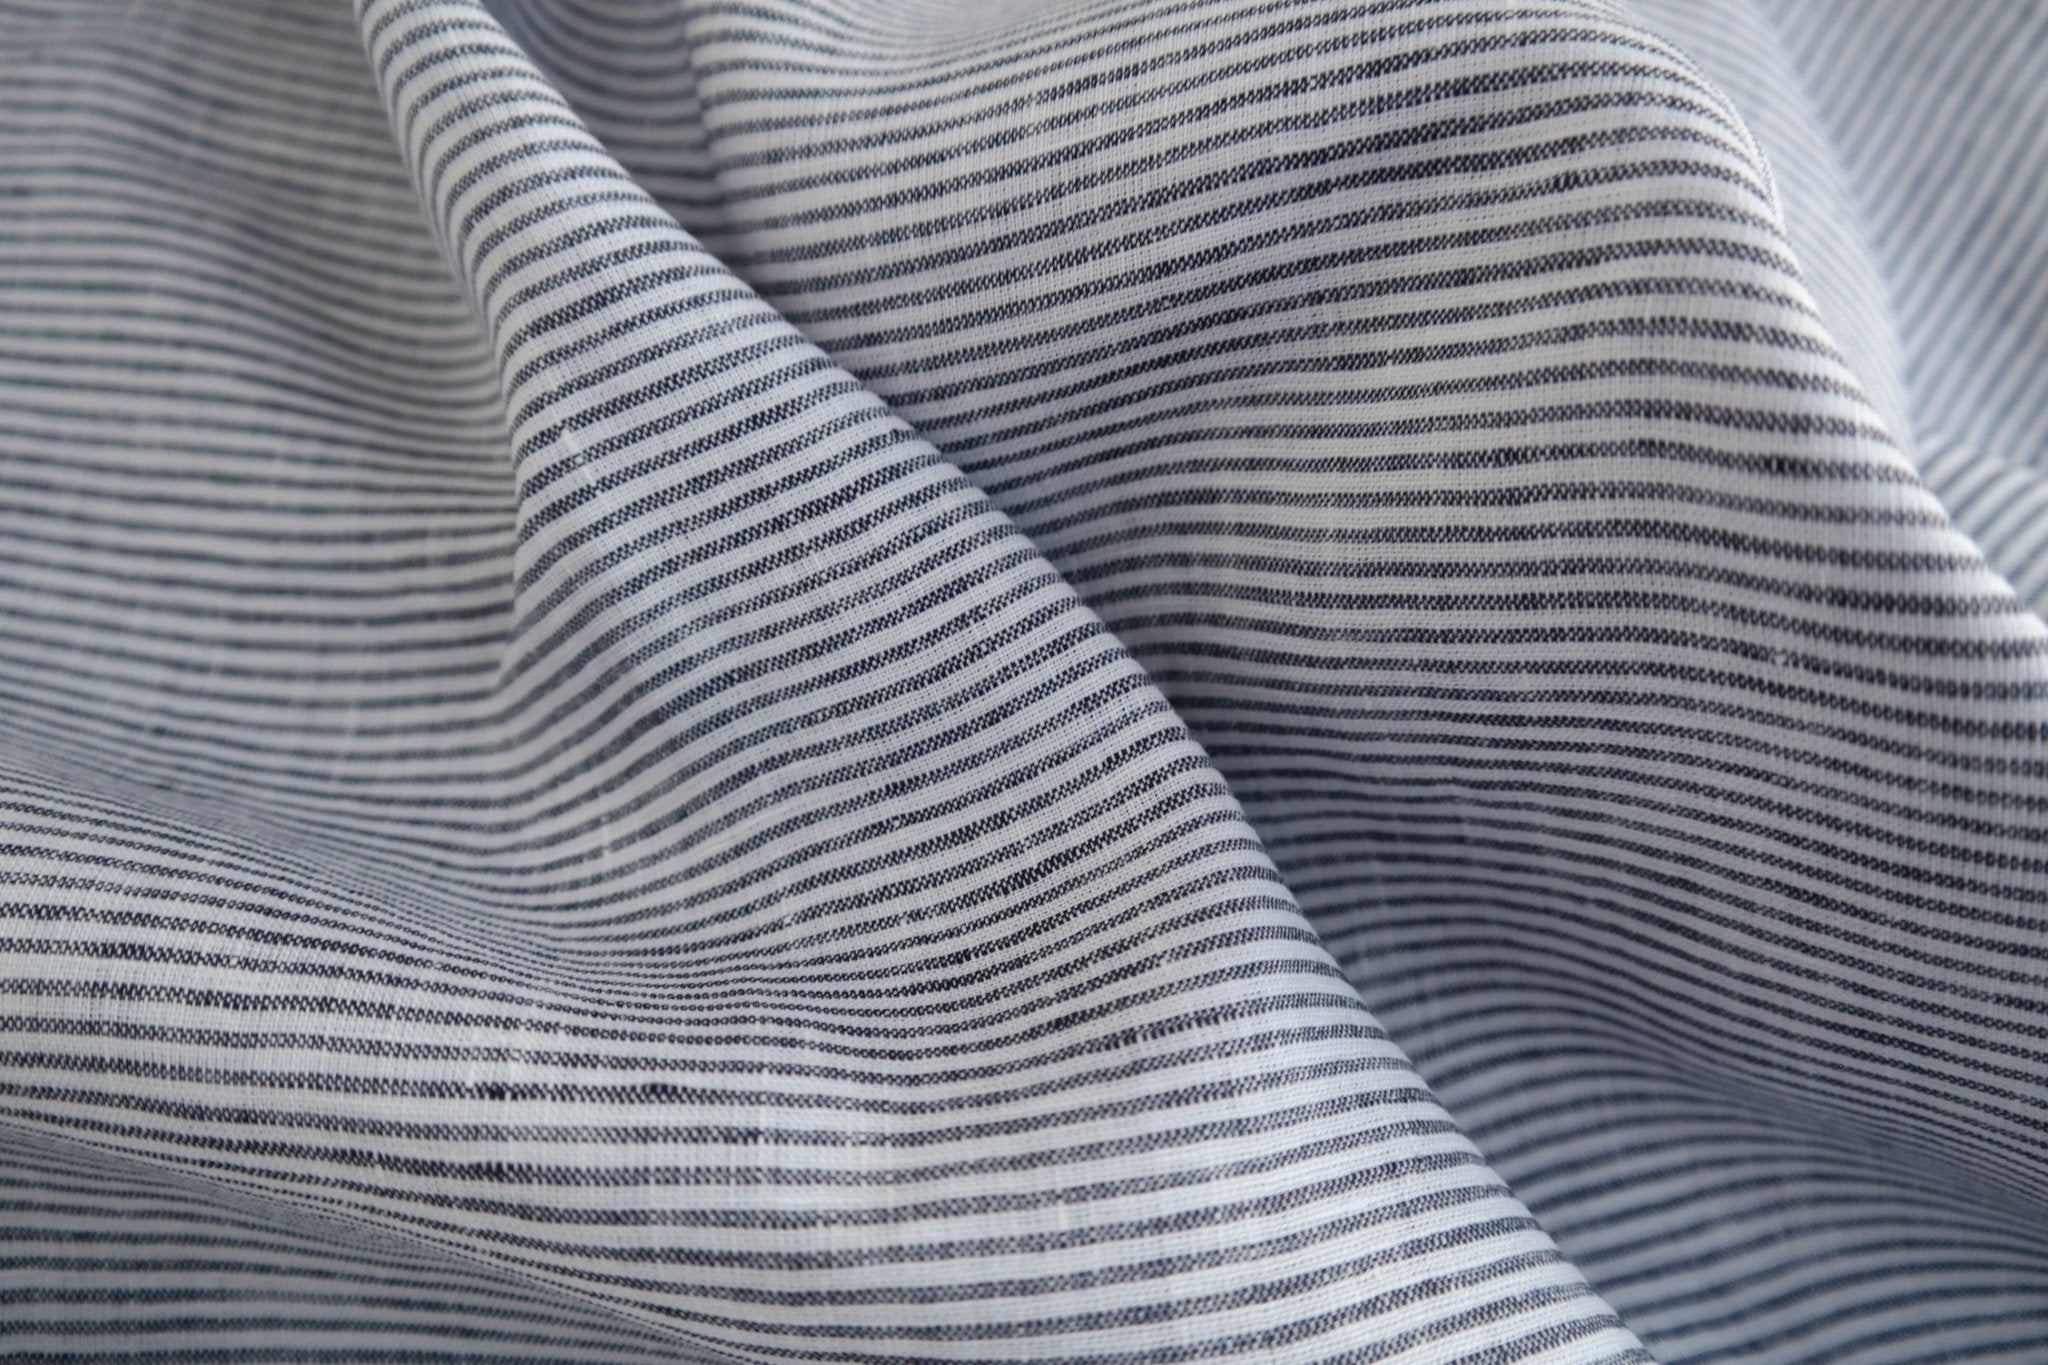 100% Linen Fabric Thin Stripe Collections Light Weight 4768 6939 6280 6279 - The Linen Lab - D/navy 6280